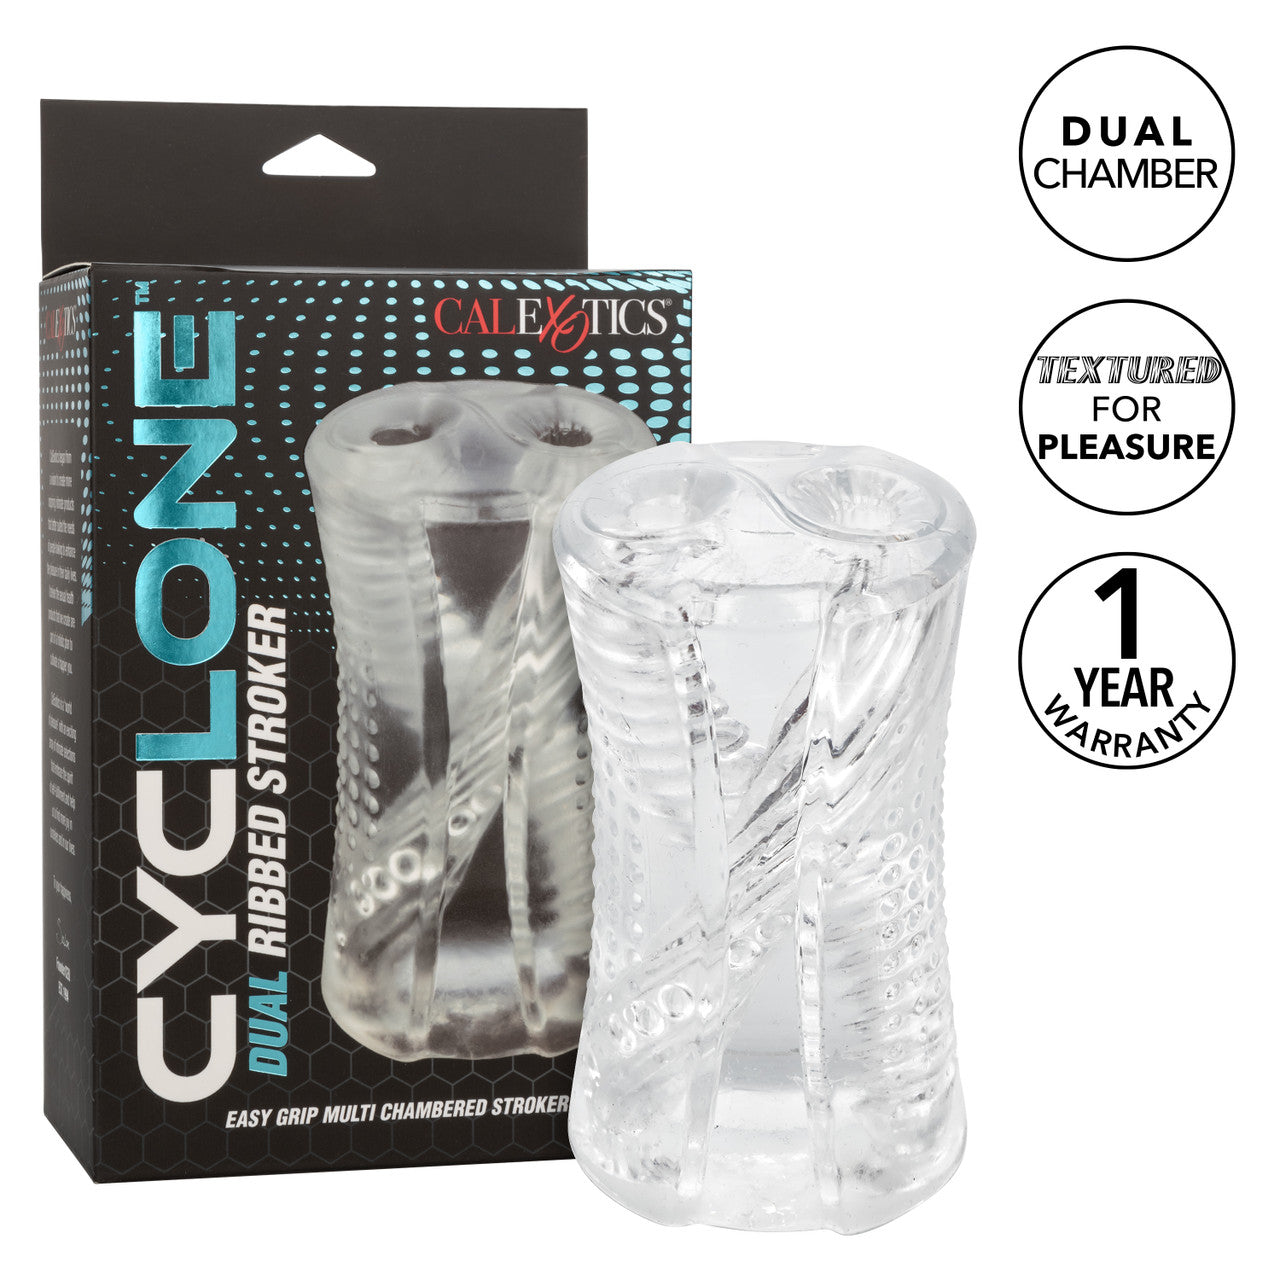 Cyclone Dual Ribbed Frotting Stroker